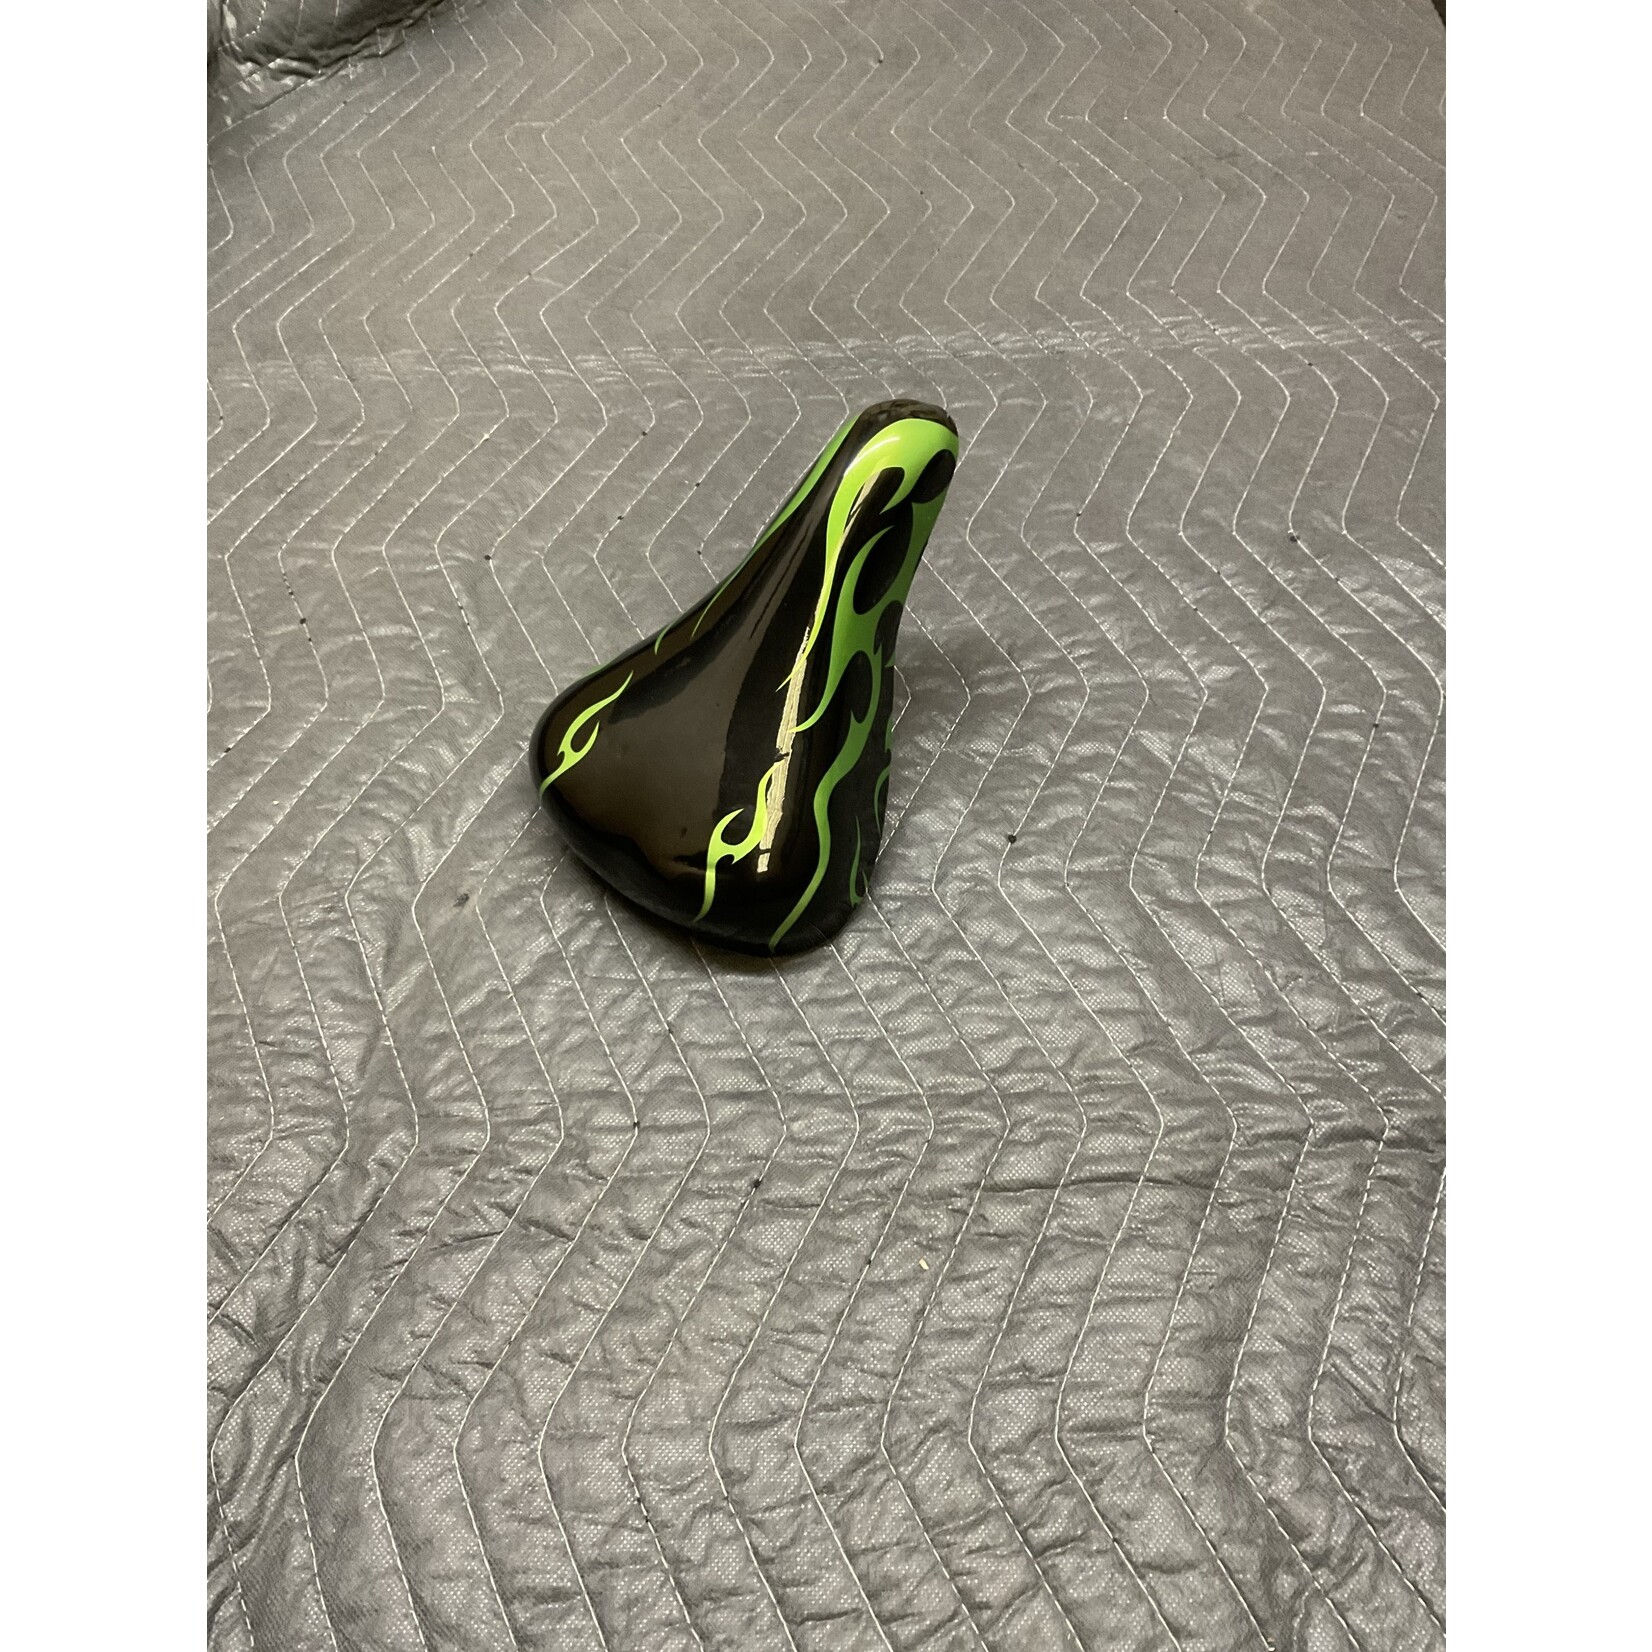 Children’s Bicycle Seat (Green Flames)